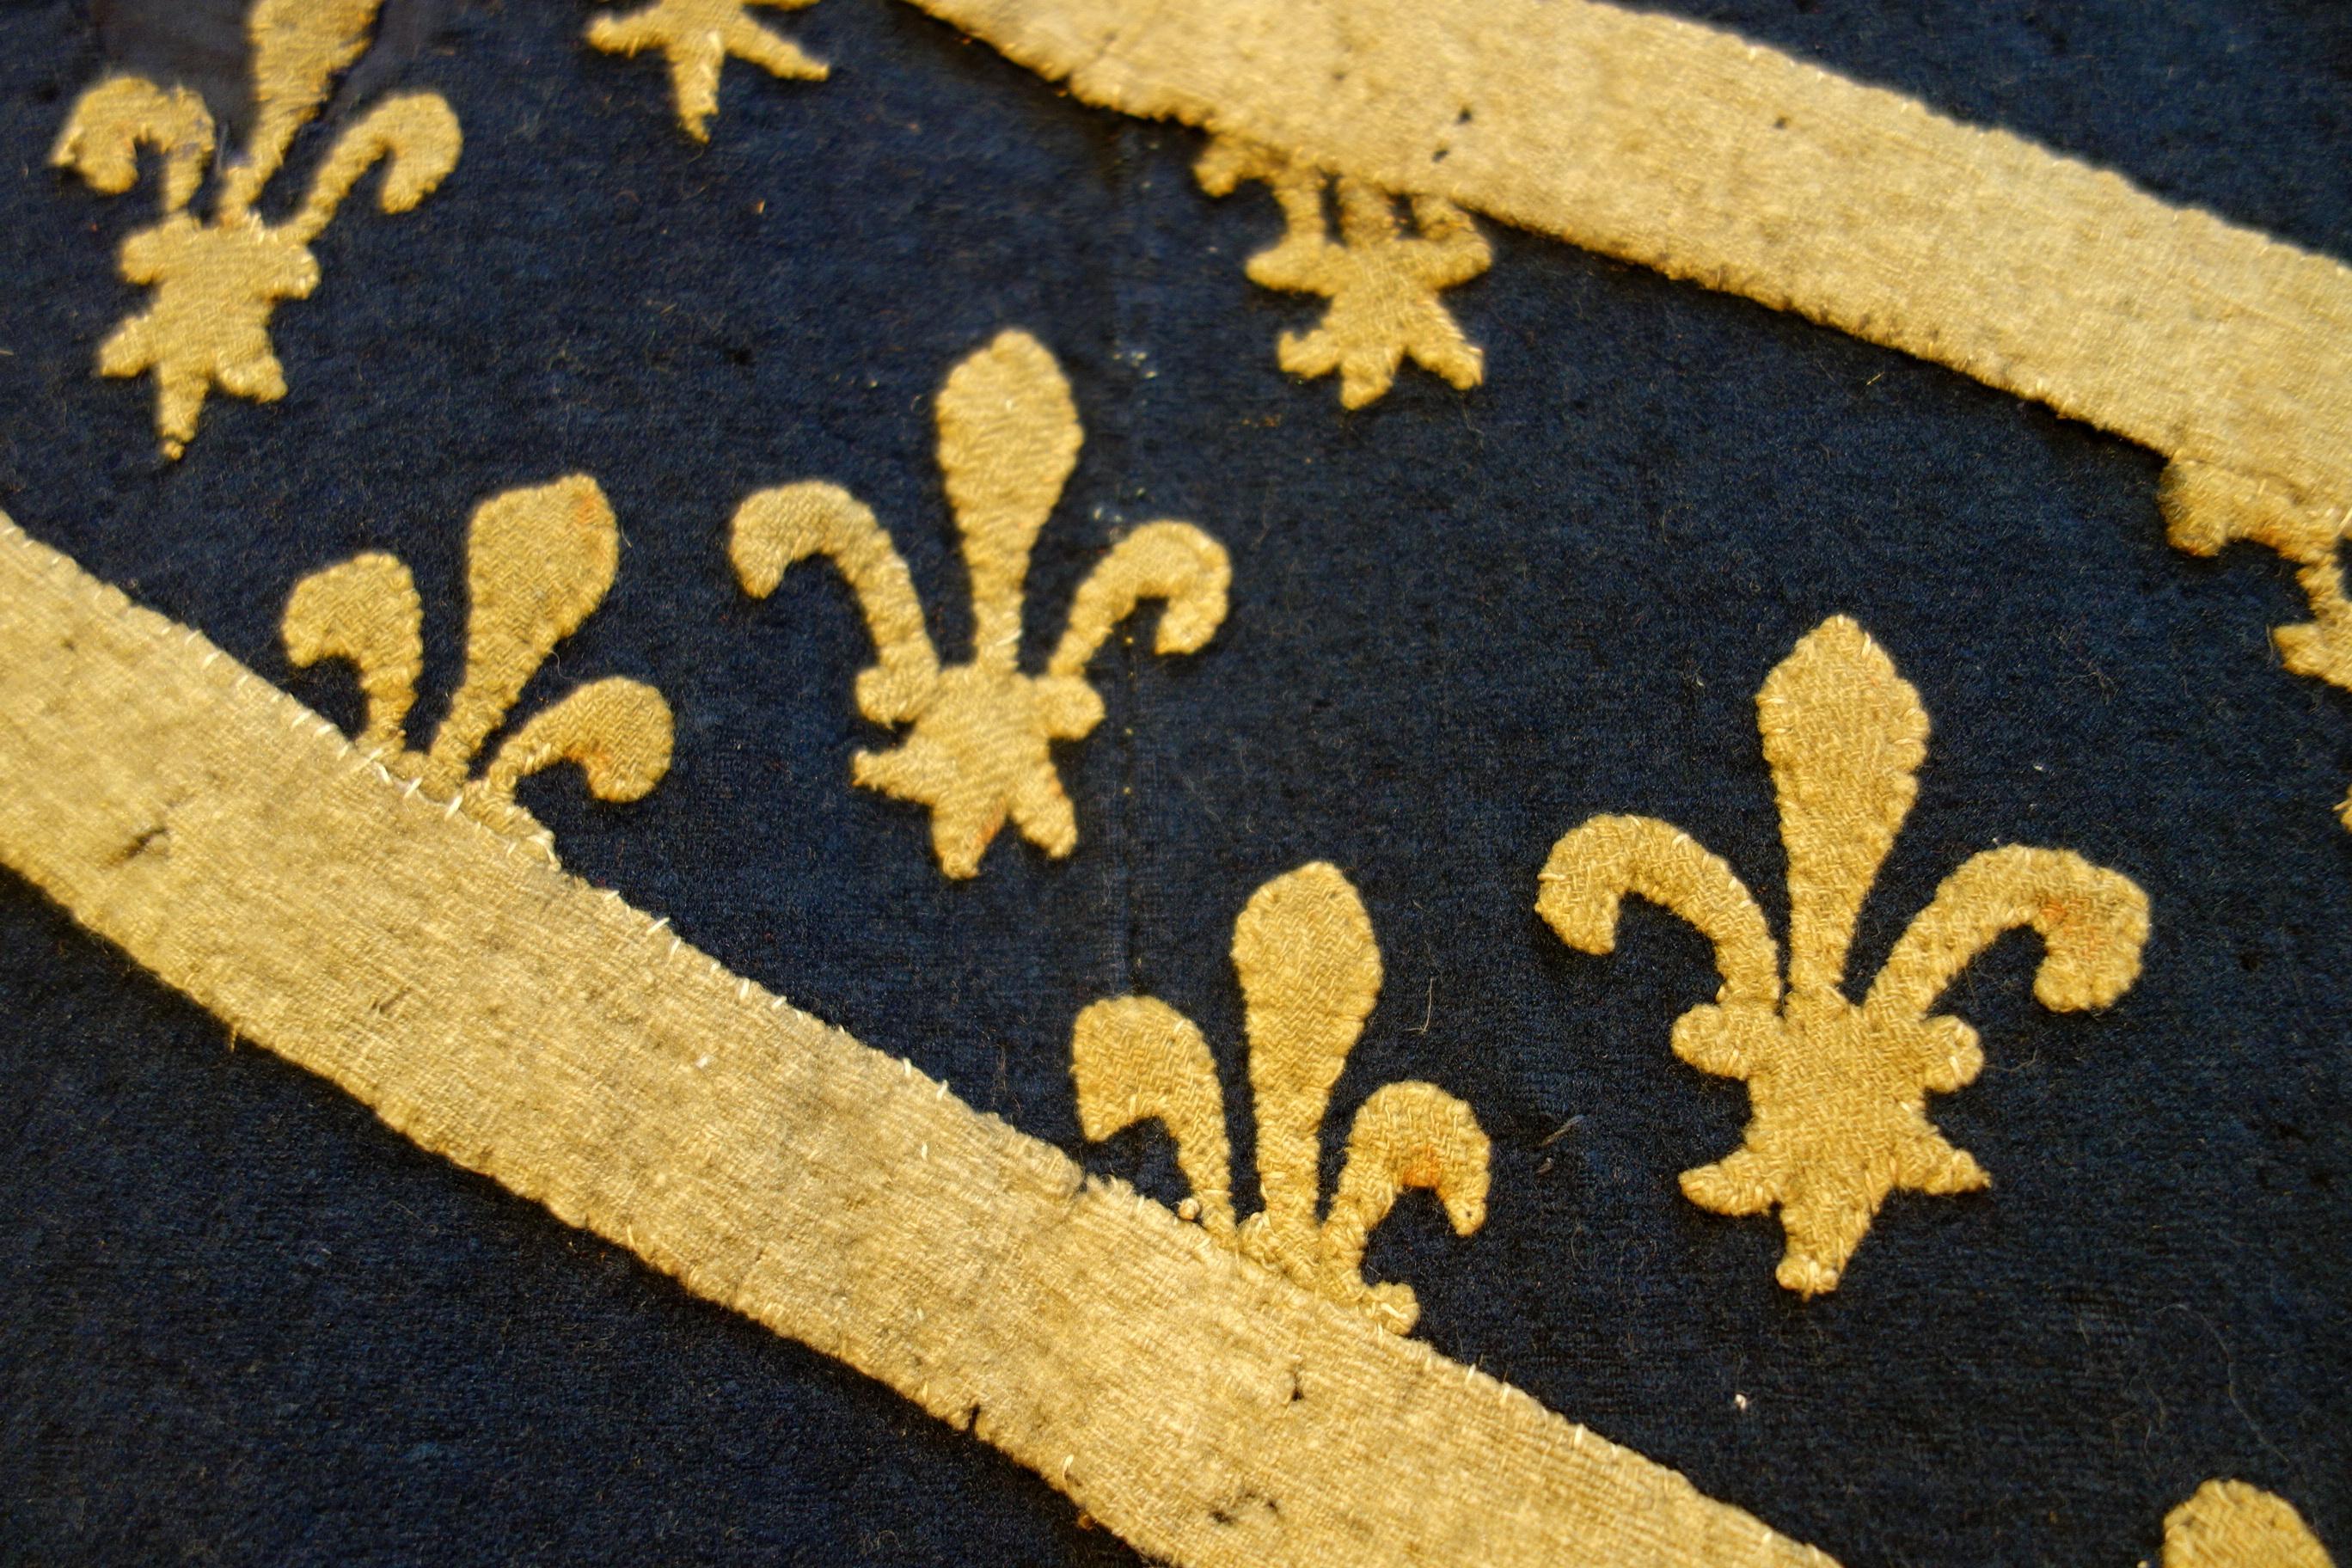 Late 17th Century Italian Heraldic Coat of Arms Tapestry, Lucca, circa 1690 For Sale 10